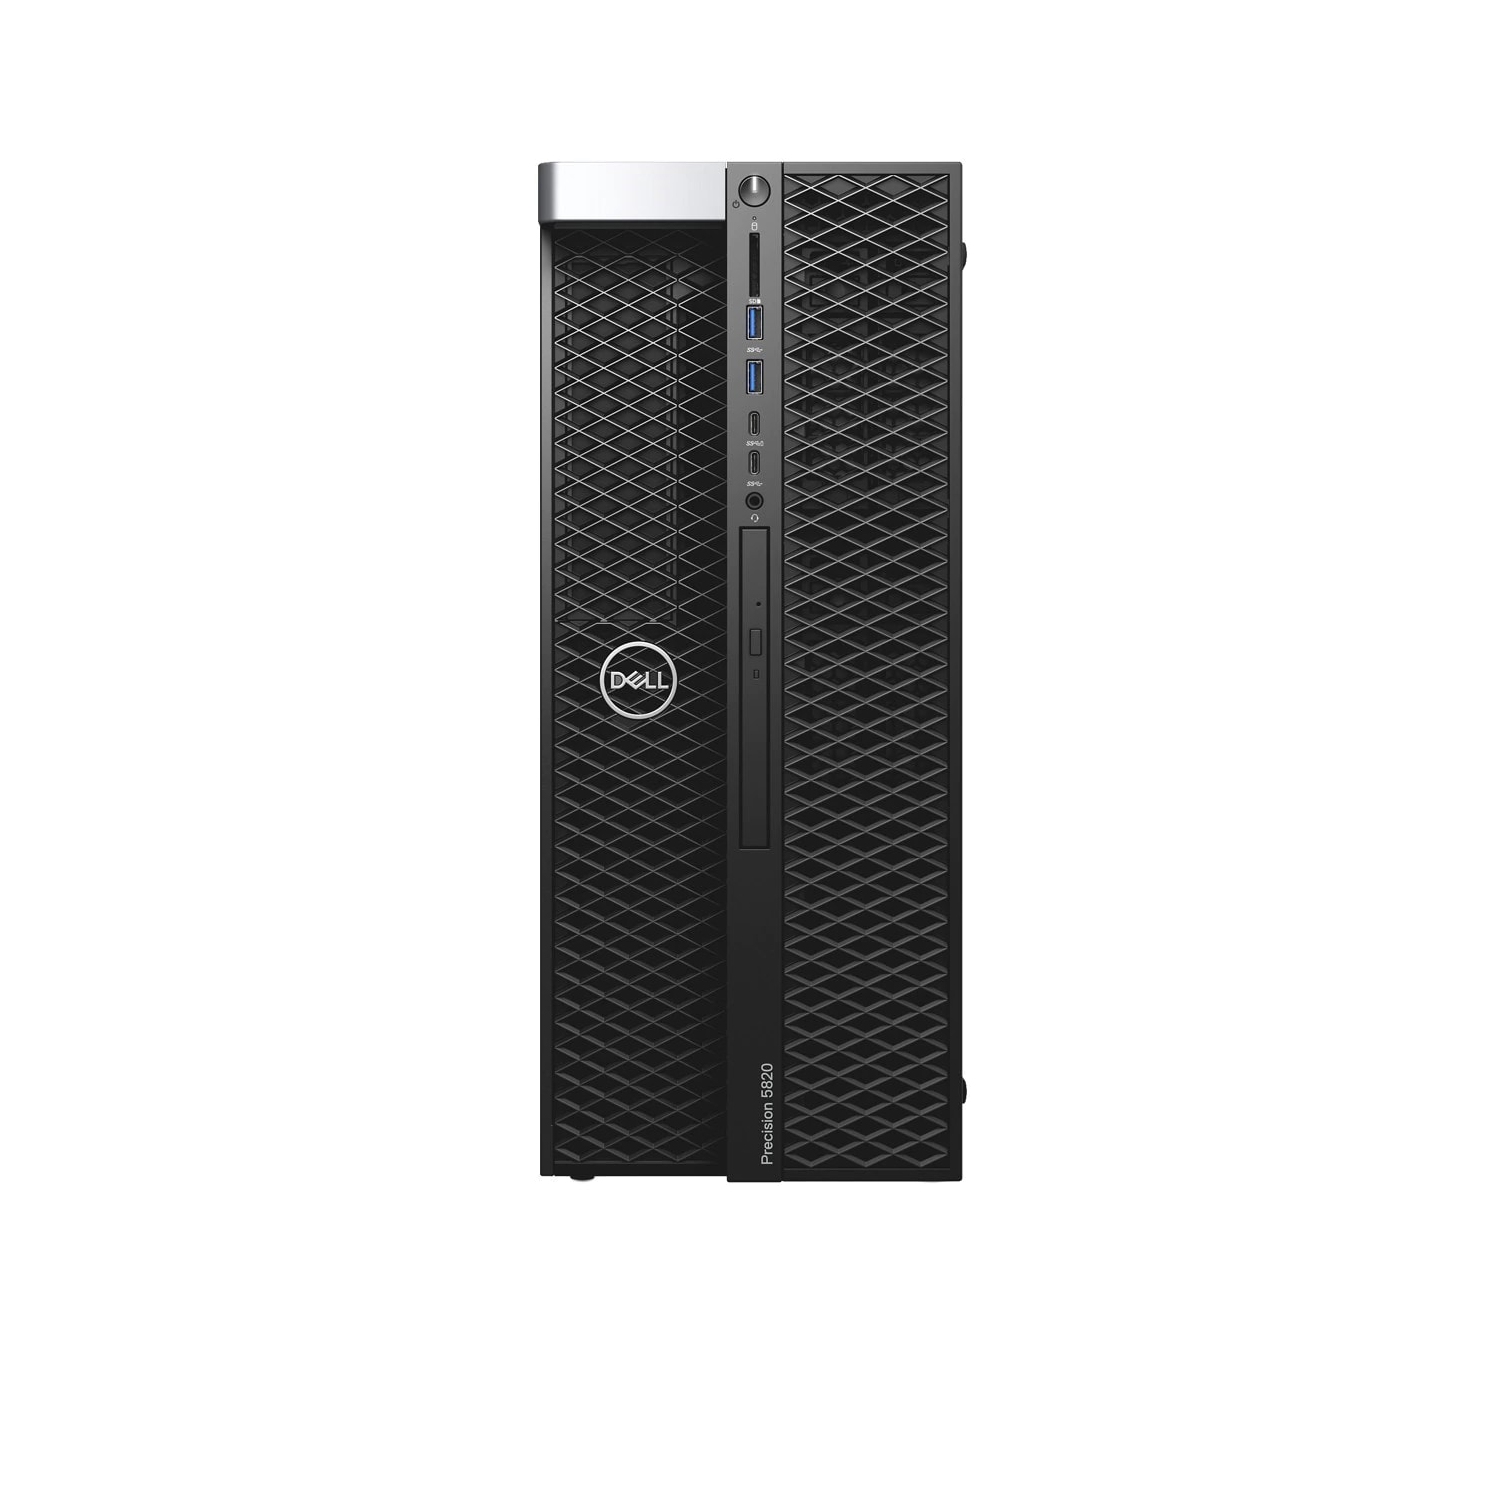 Refurbished (Excellent) - Dell Precision T5820 Workstation Desktop (2018) | Core Xeon W - 512GB SSD - 64GB RAM - RTX 5000 | 8 Cores @ 4.5 GHz Certified Refurbished